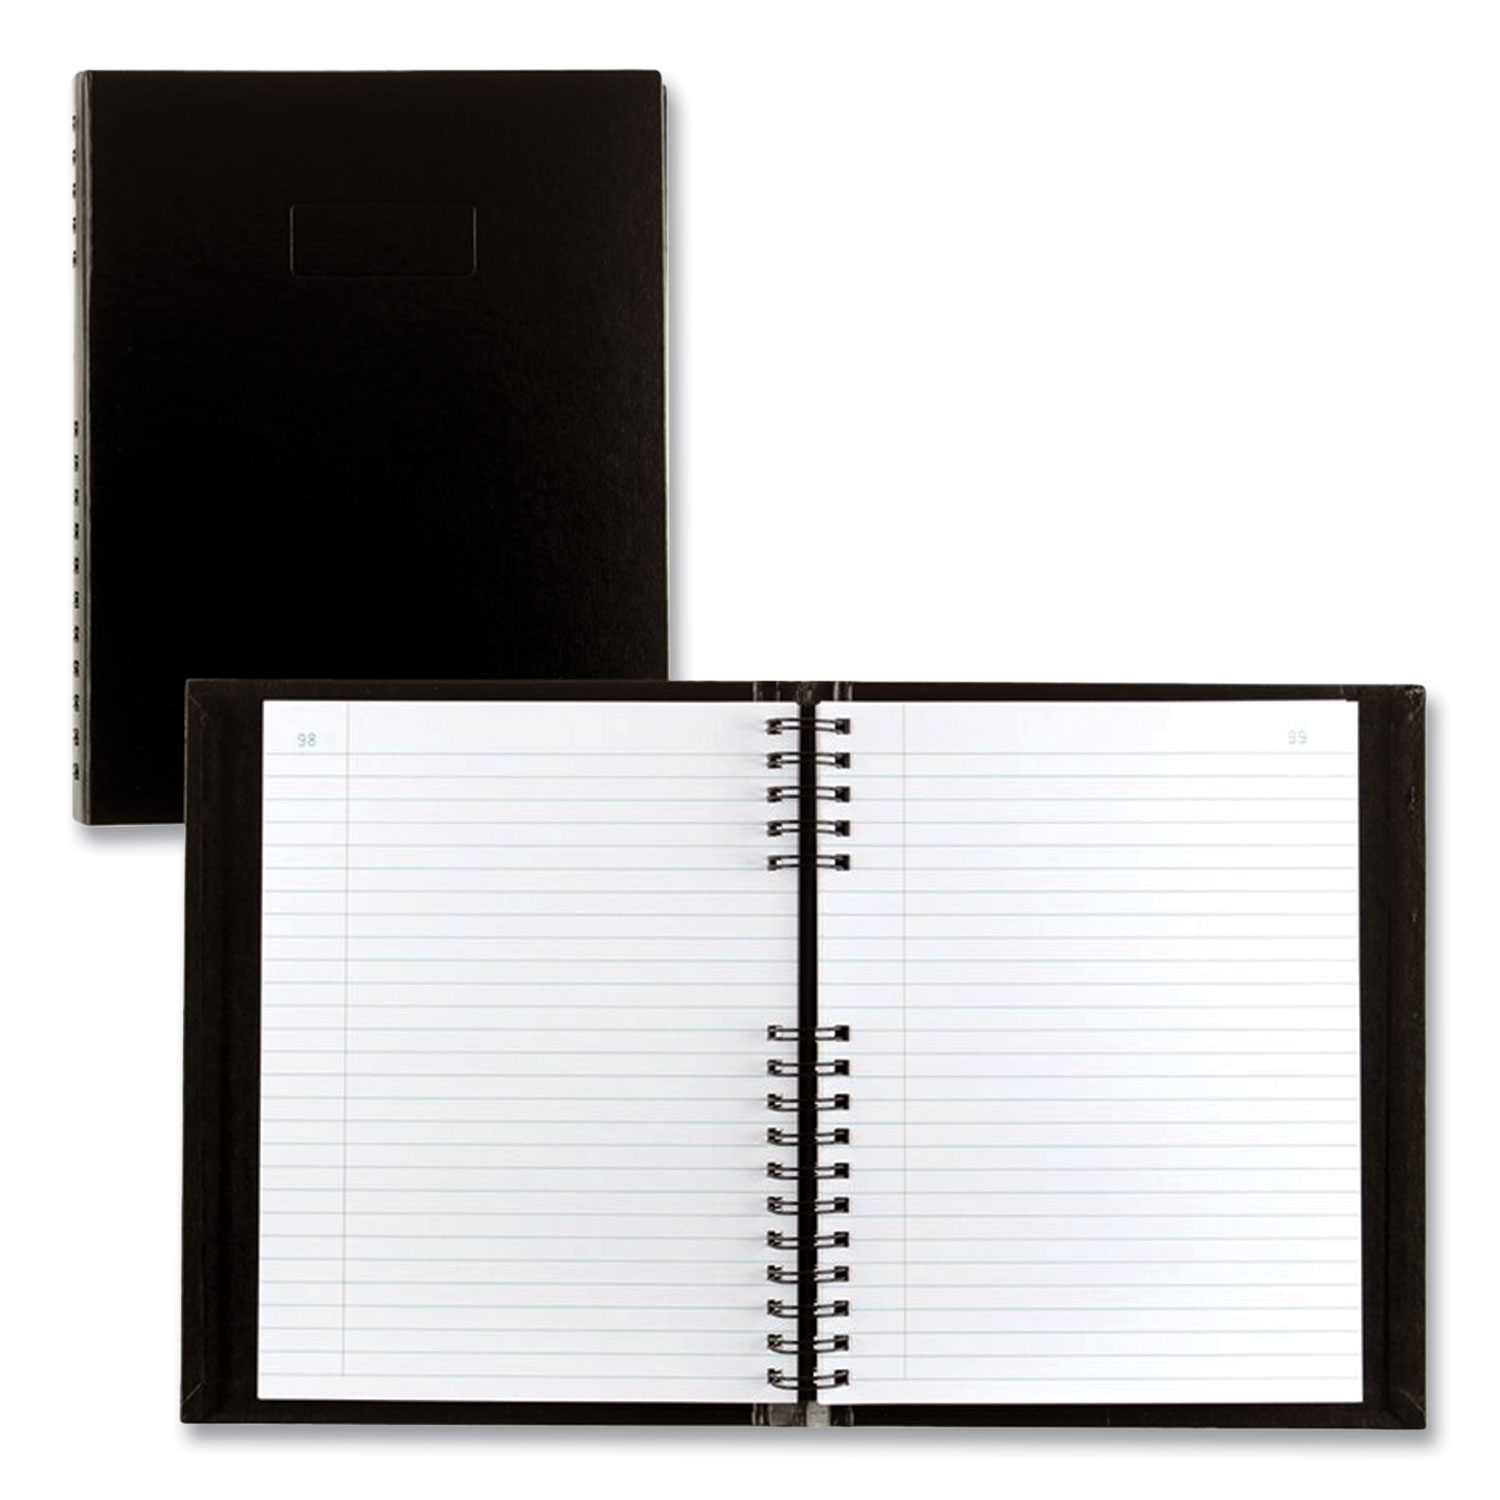 Blueline® AccountPro Records Register Book, Black Cover, 7.69 x 10.25, 300 White Pages